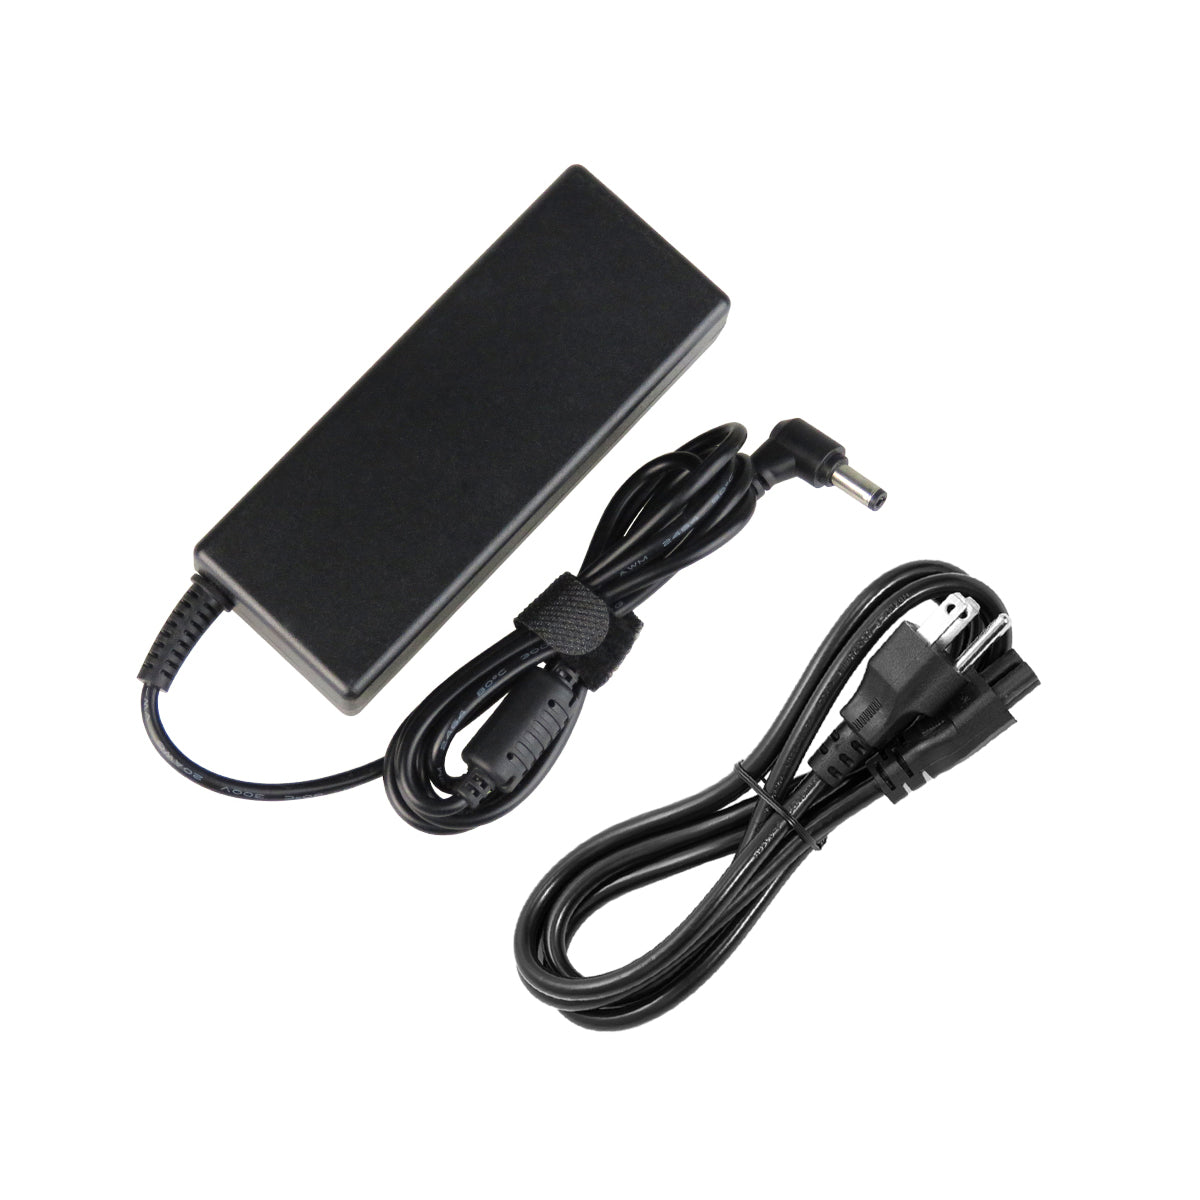 AC Adapter Charger for ASUS X88Vf Notebook.